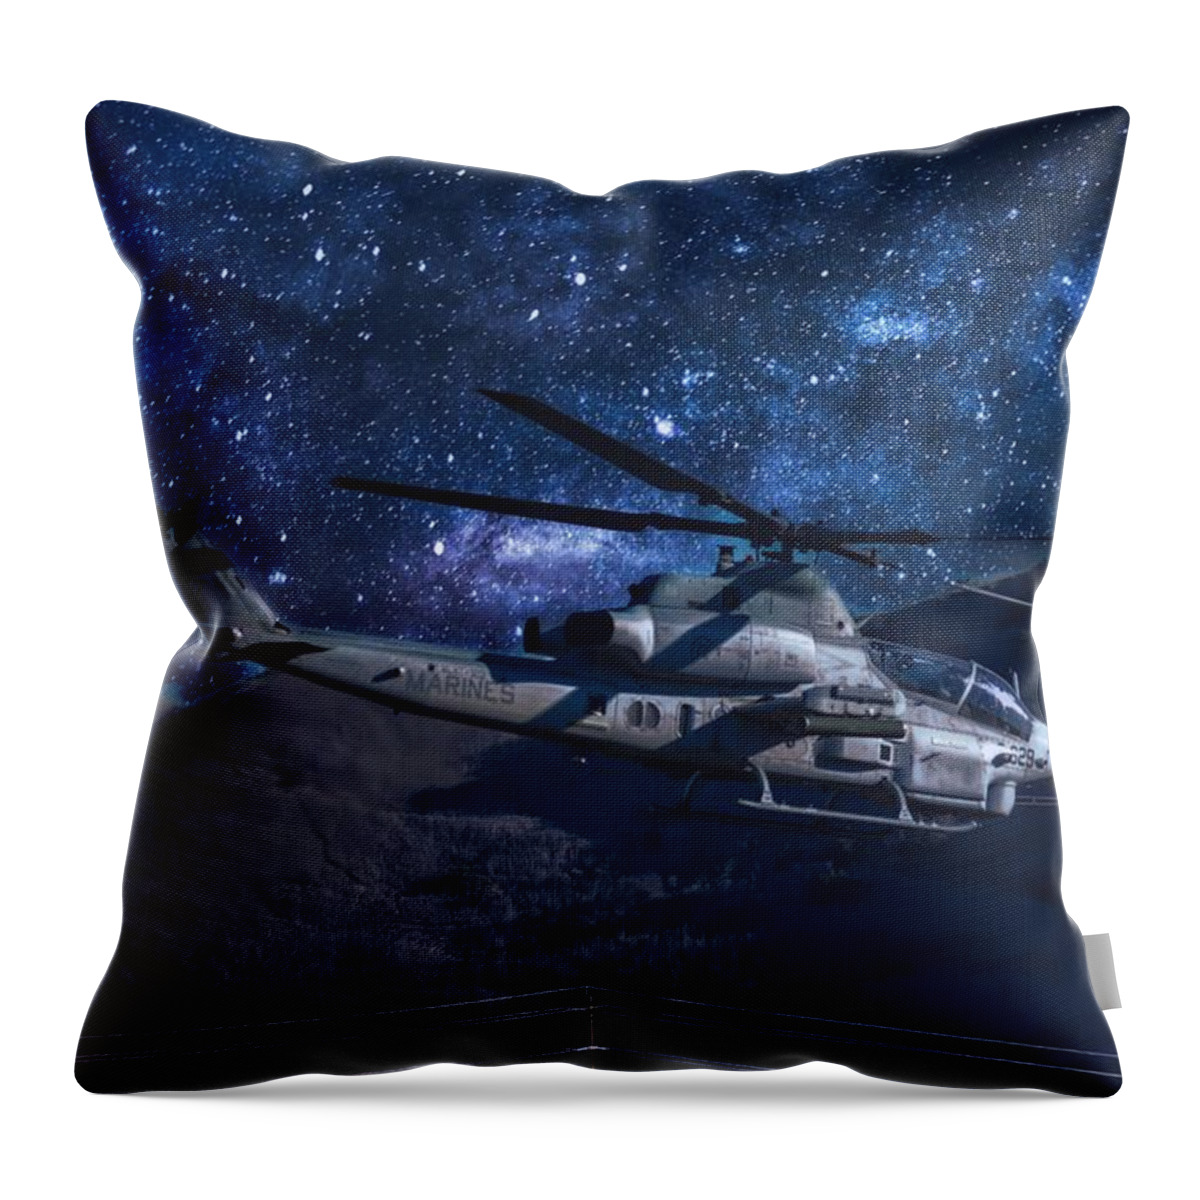 Usmc Throw Pillow featuring the photograph Night Moves by Tommy Anderson